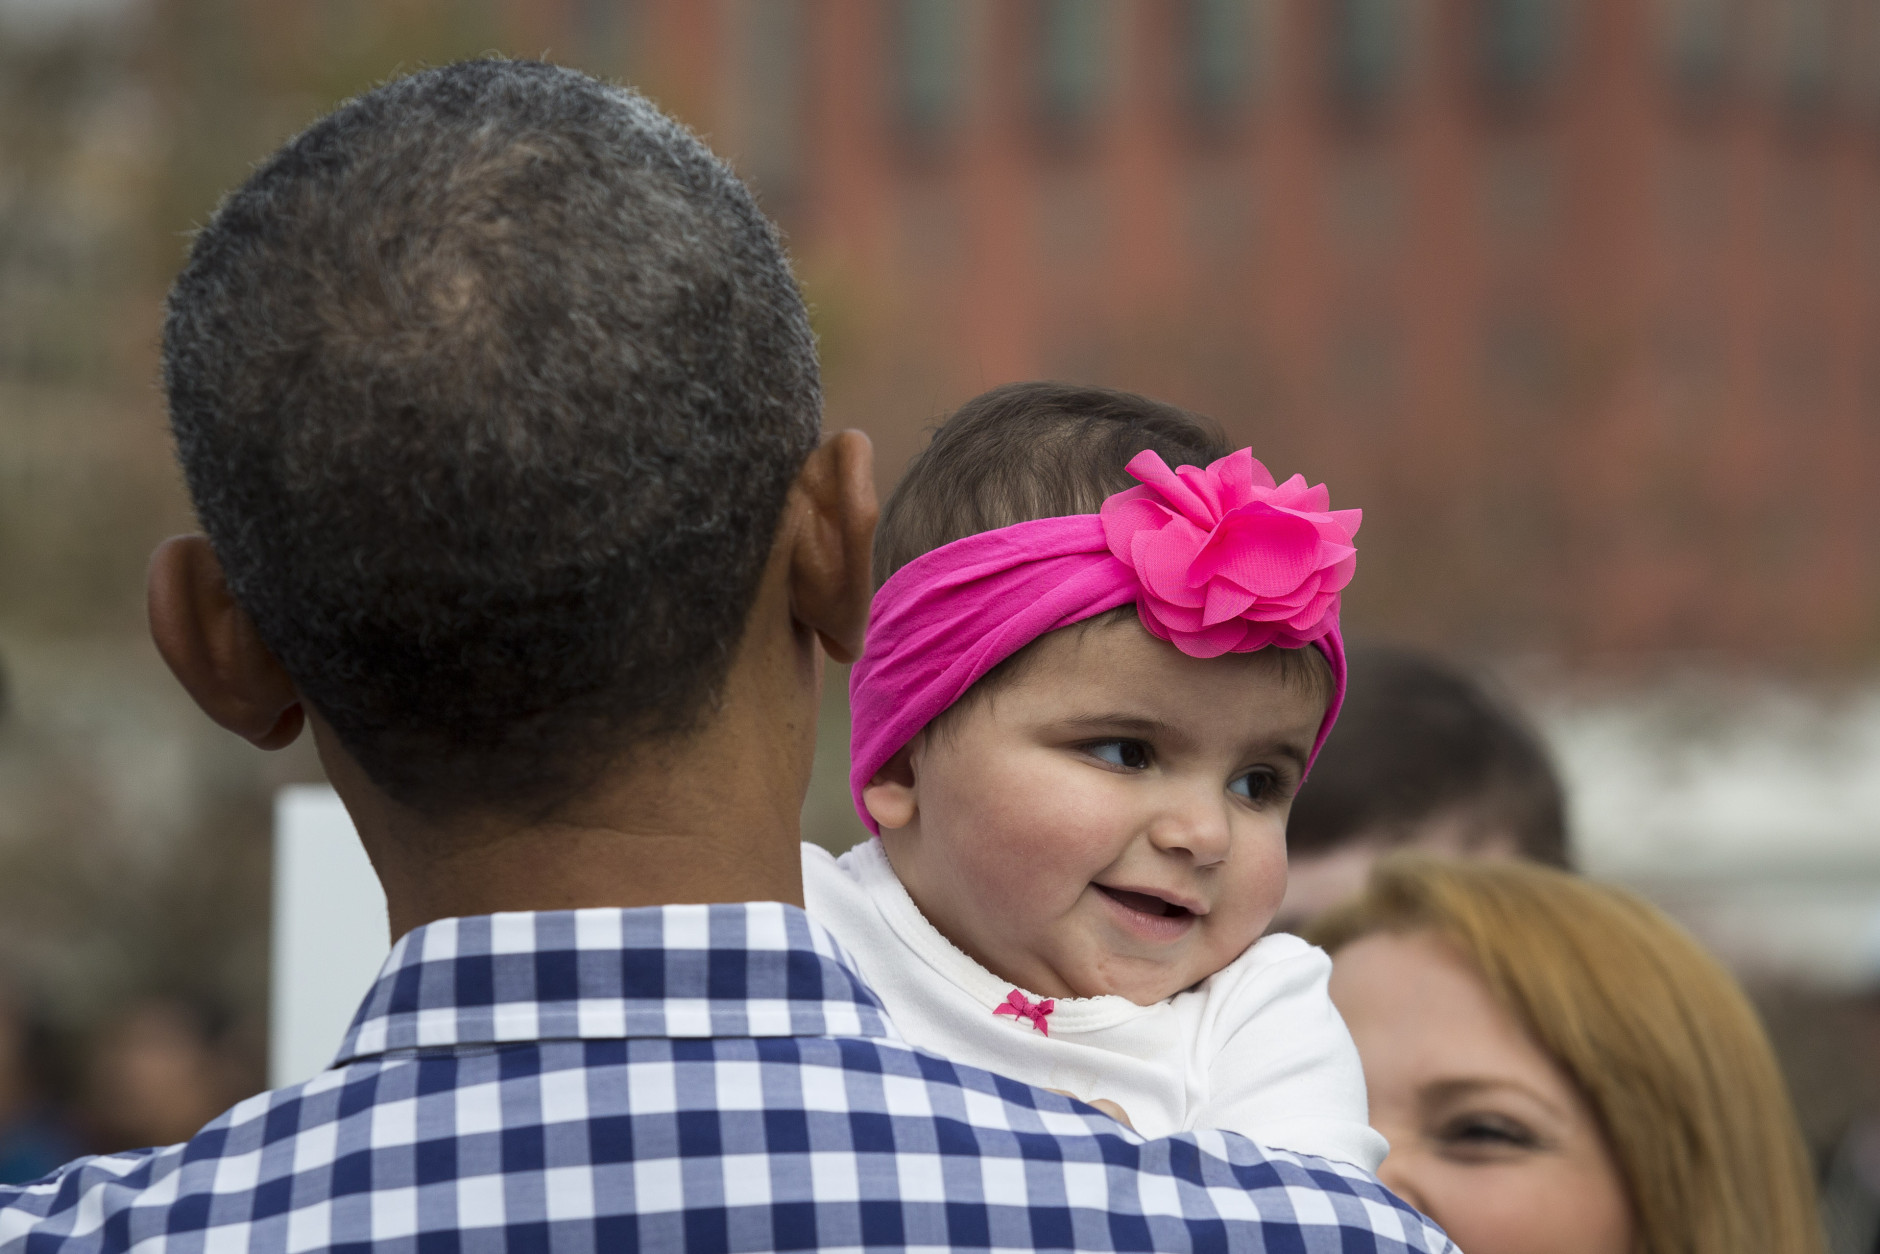 WASHINGTON, DC - MARCH 28: President Barack Obama holds Stella Munoz during the annual White House Easter Egg Roll on the South Lawn of the White House March 28, 2016 in Washington, DC. The tradition dates back to 1878 when President Rutherford B. Hayes allowed children to roll eggs on the South Lawn. (Photo by Drew Angerer/Getty Images)